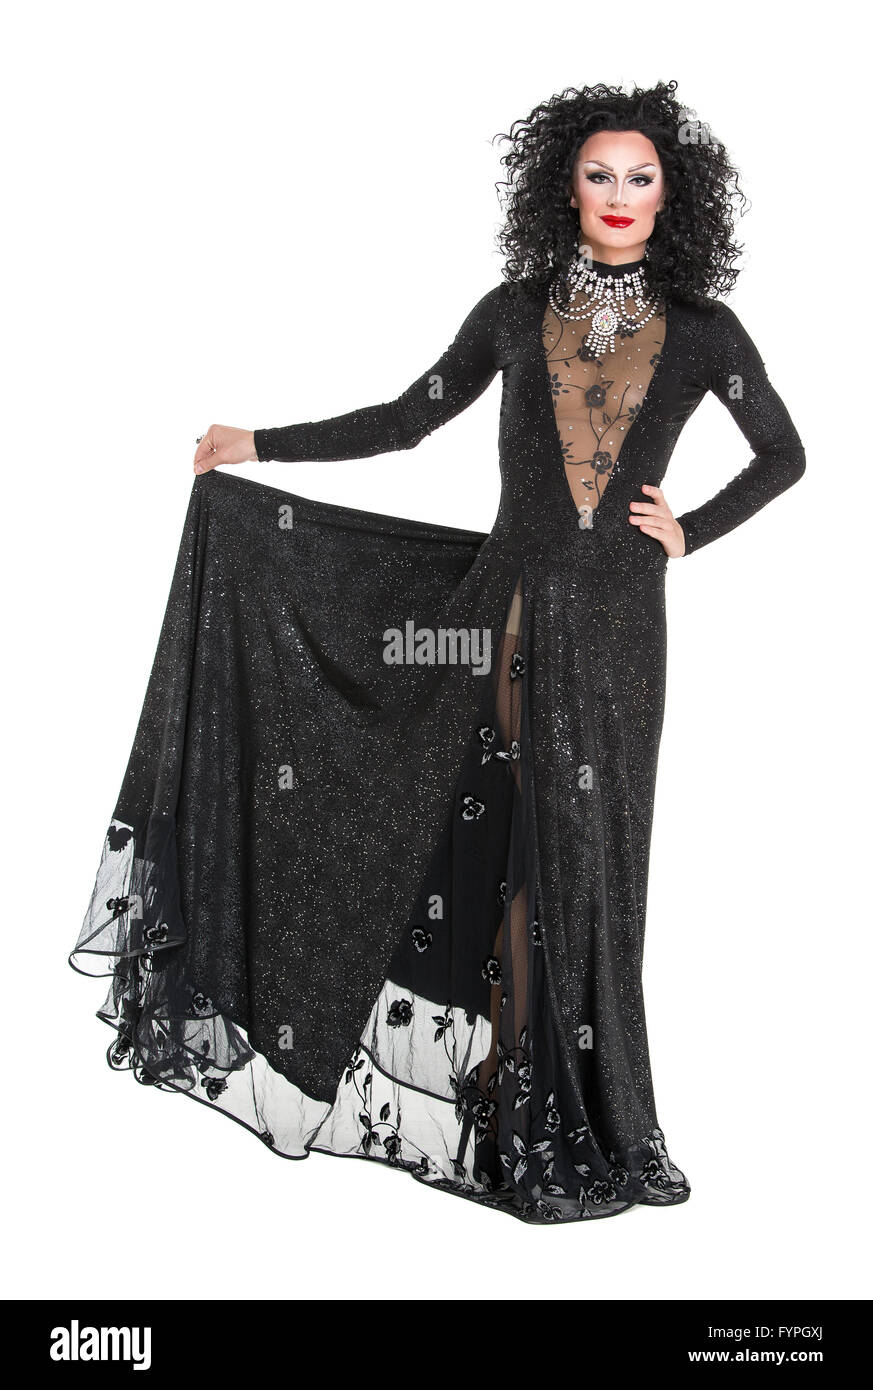 Drag Queen in Black Evening Dress Performing Stock Photo